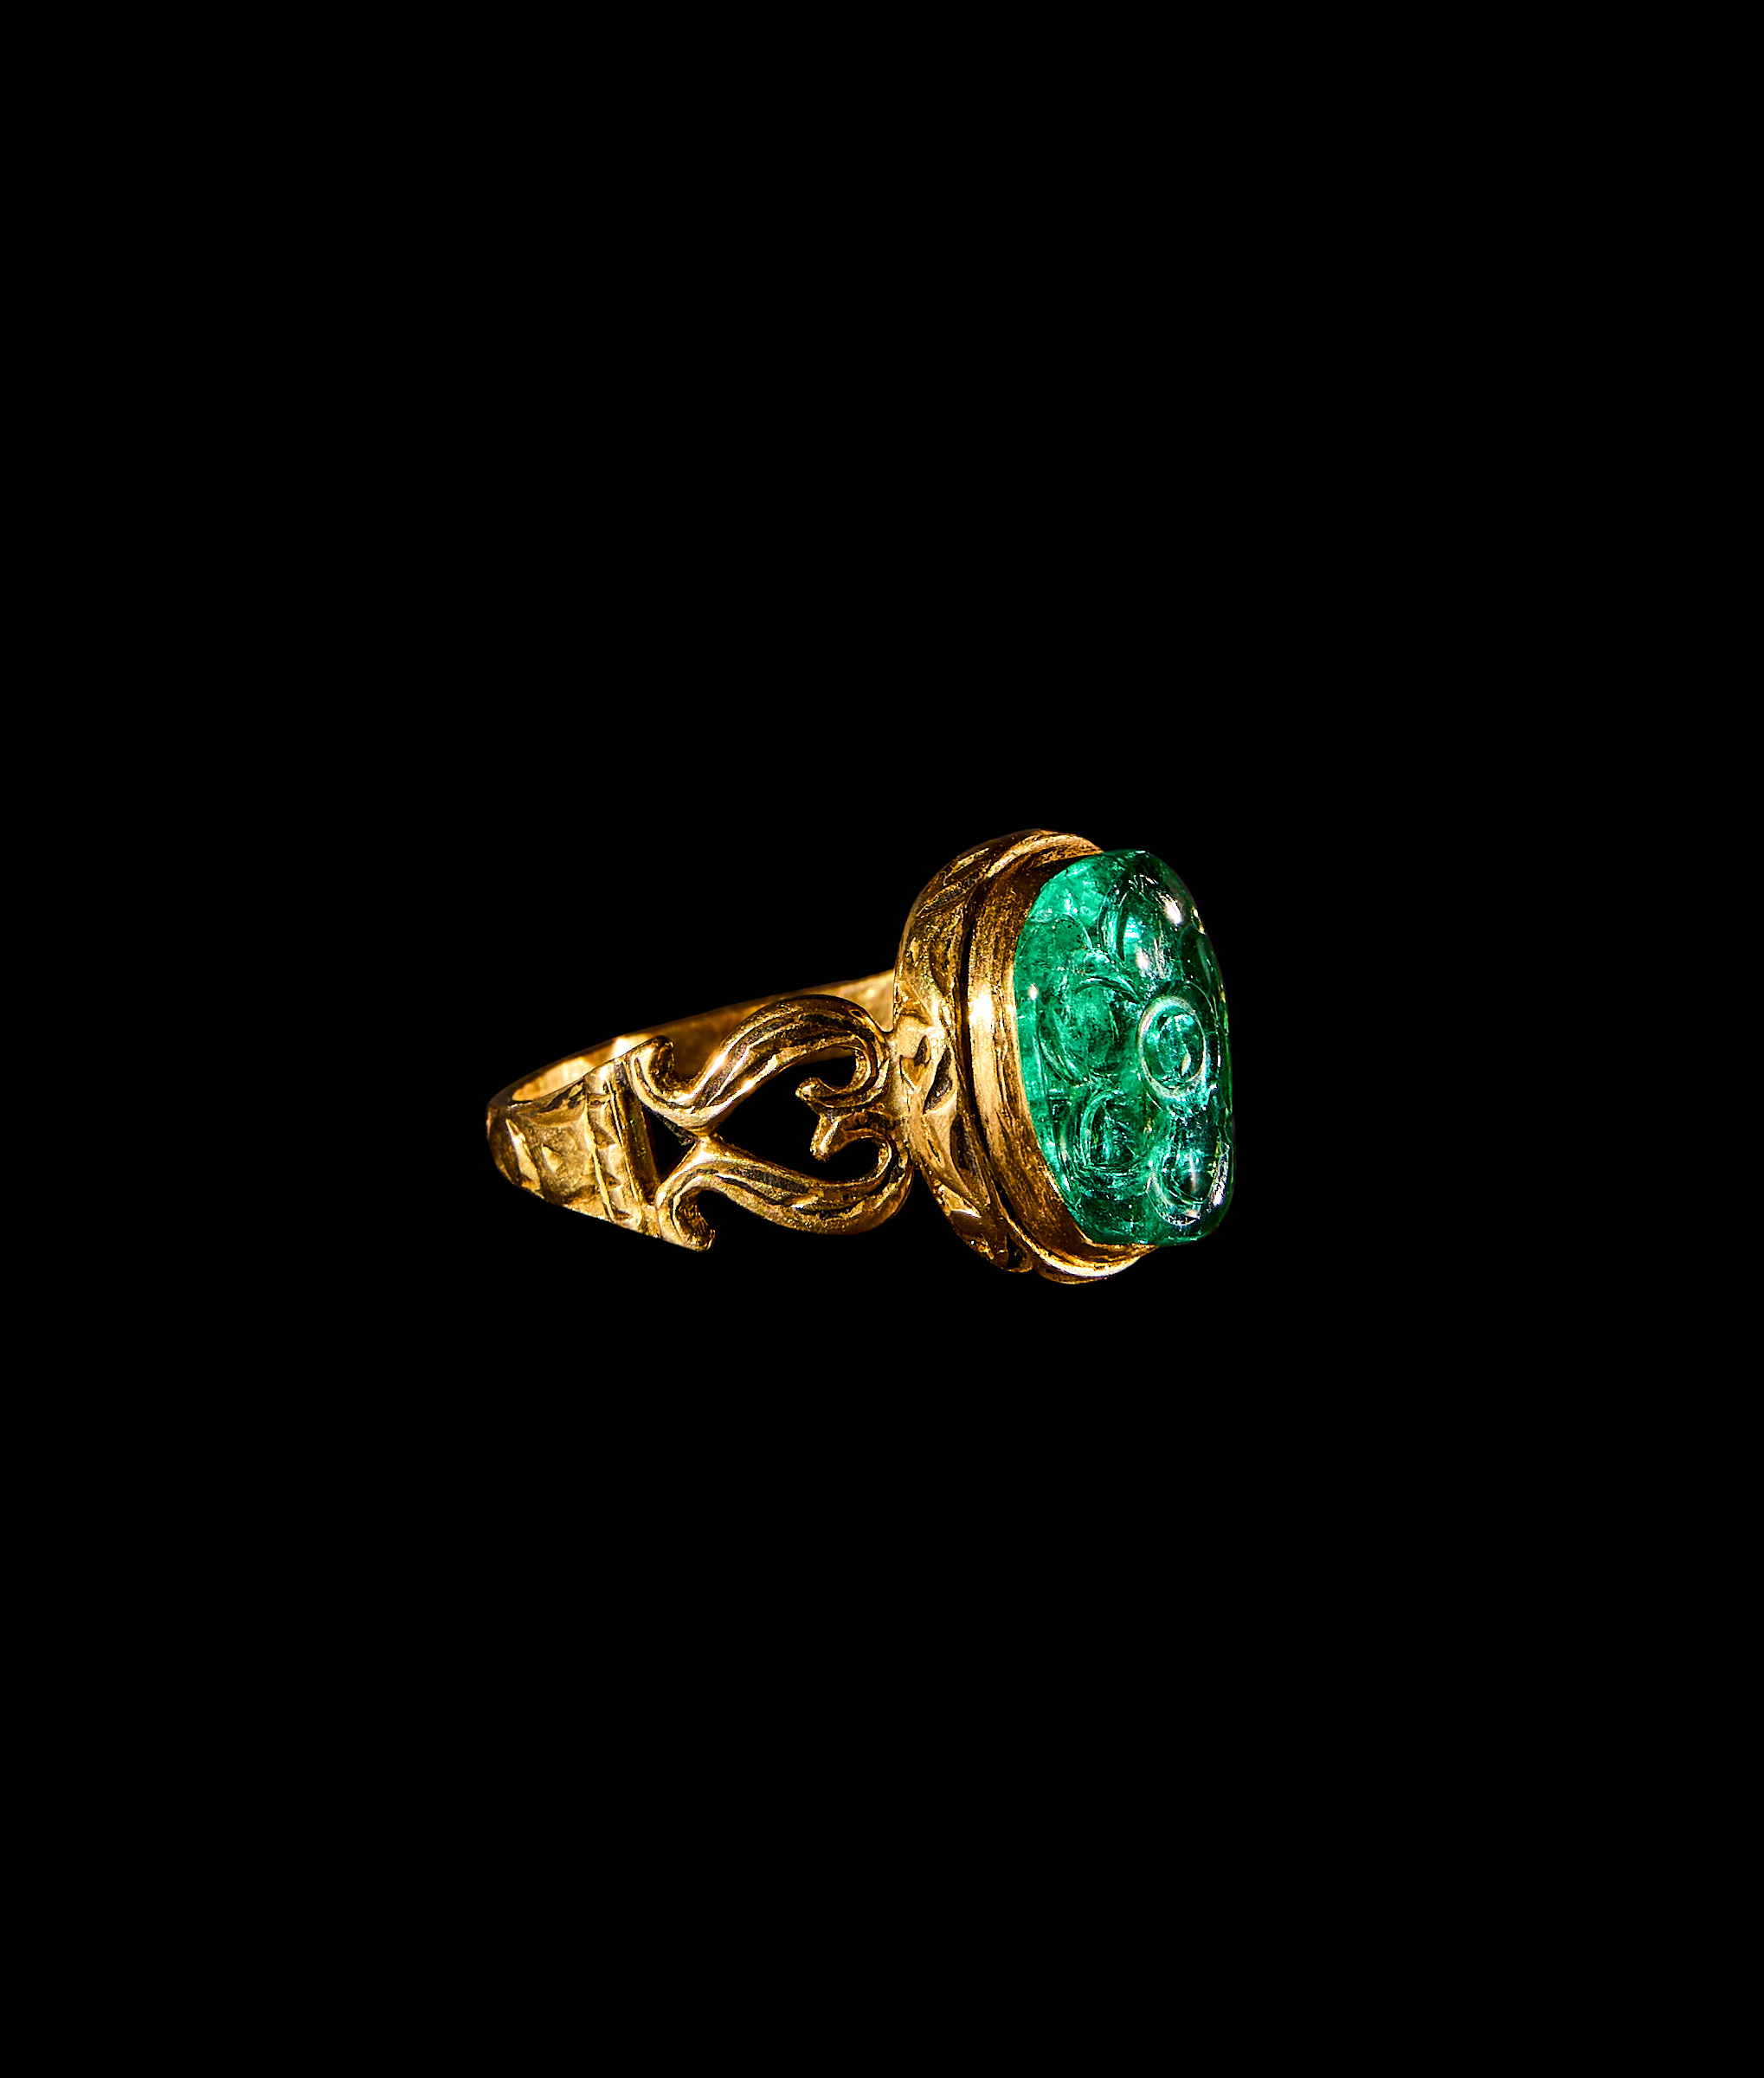 AN ENGRAVED MUGHAL EMERALD & GOLD RING, MUGHAL 19TH CENTURY, INDIA - Image 2 of 3